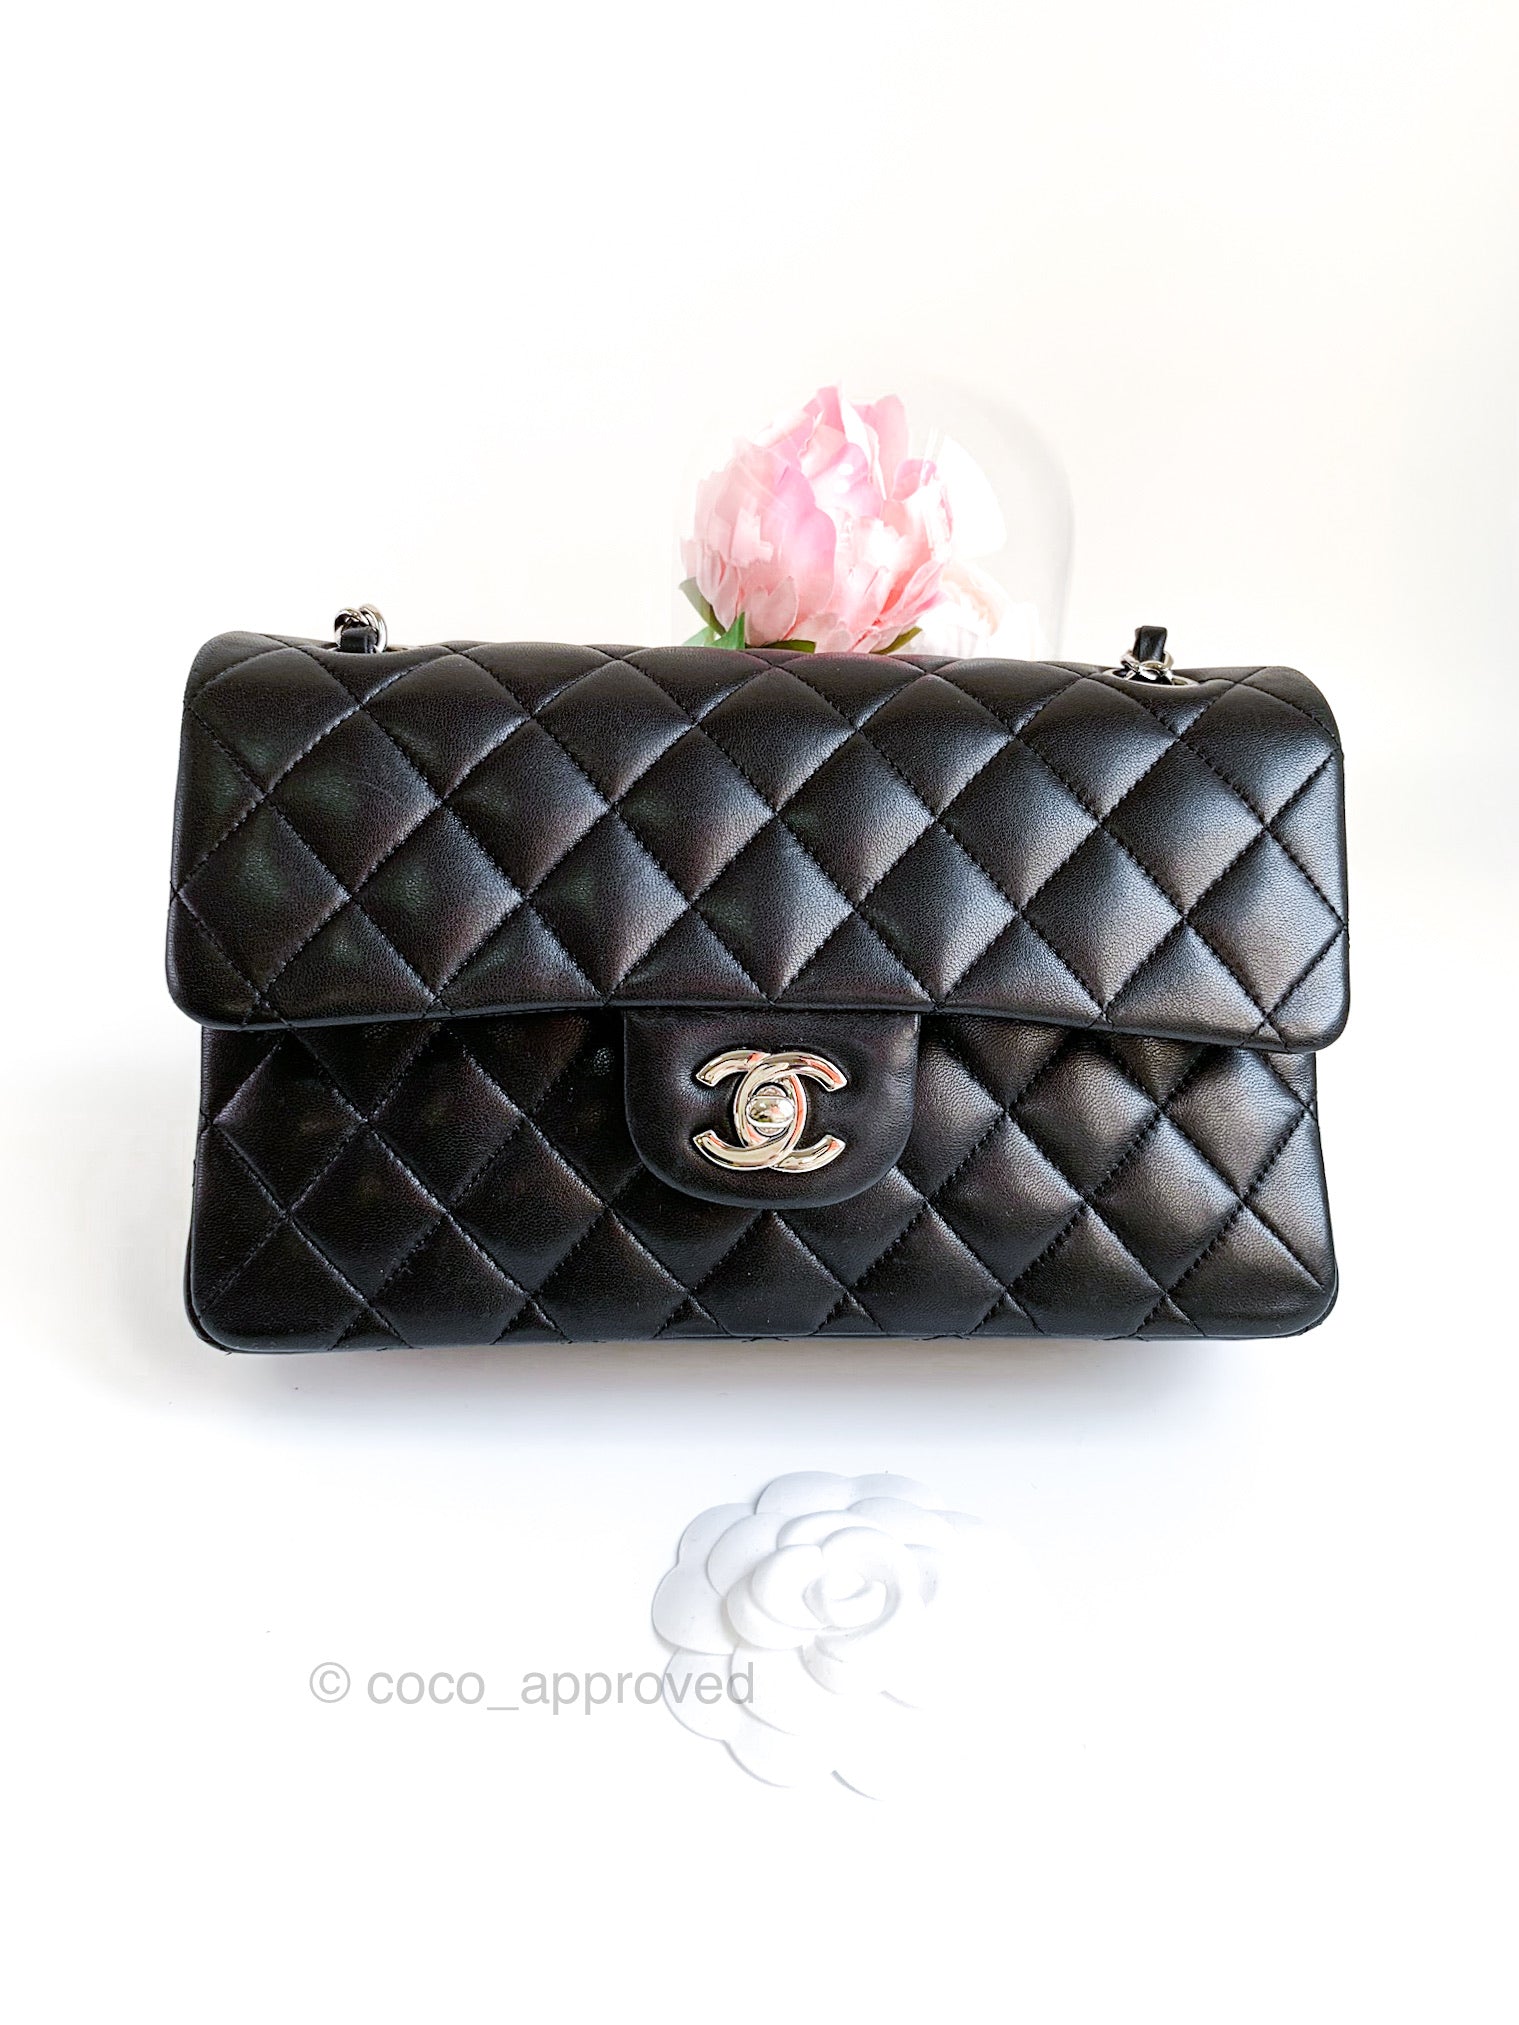 Chanel Timeless Small Flap bag - Touched Vintage